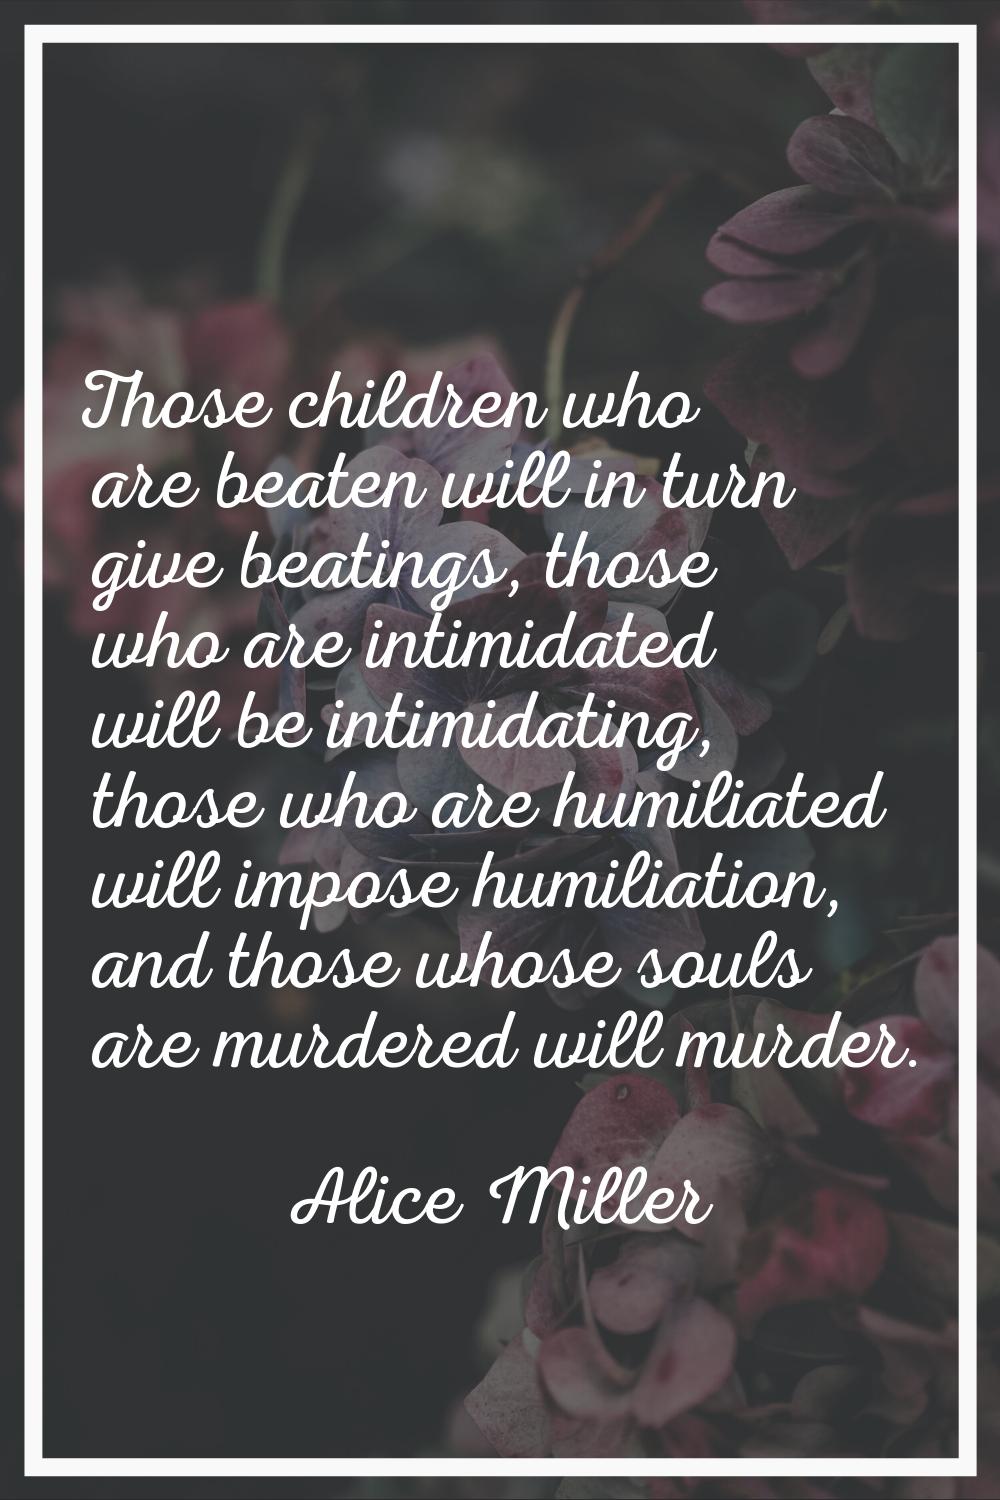 Those children who are beaten will in turn give beatings, those who are intimidated will be intimid